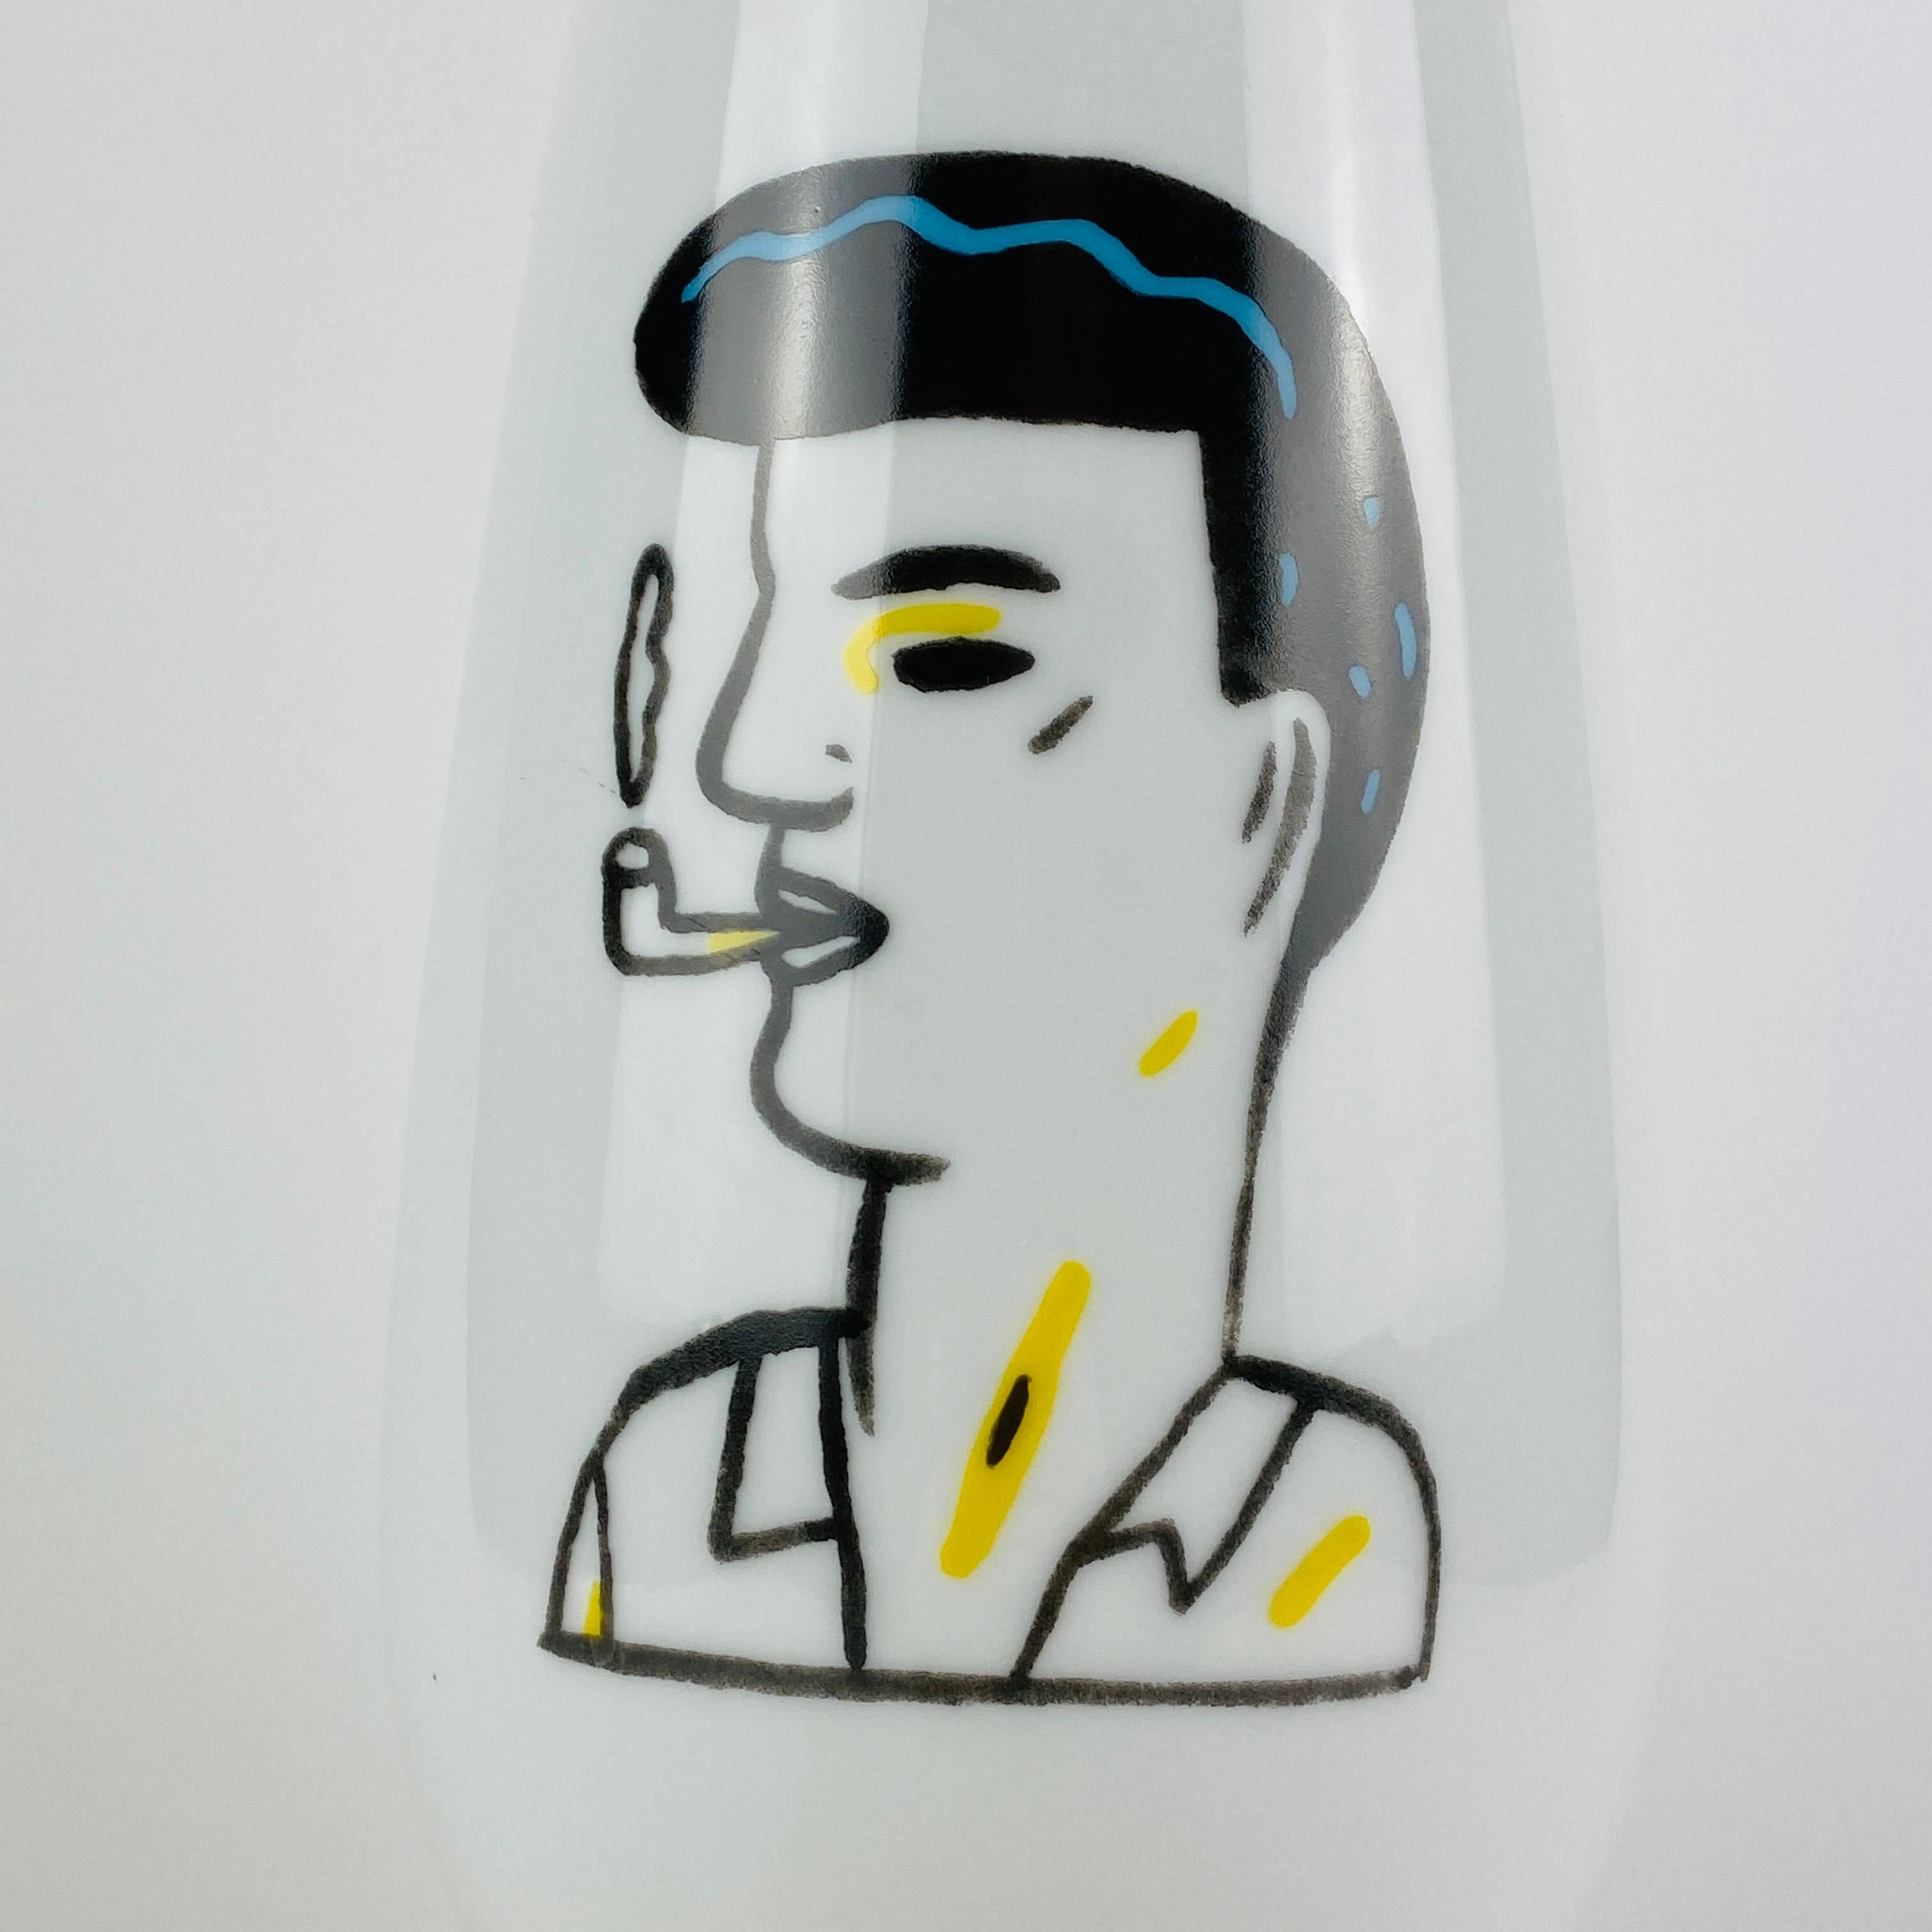 Mid-Century Modern Alessi Tendentse Vase by Guillermo Tejeda for A. Mendini 100% Make-Up Series N83 For Sale